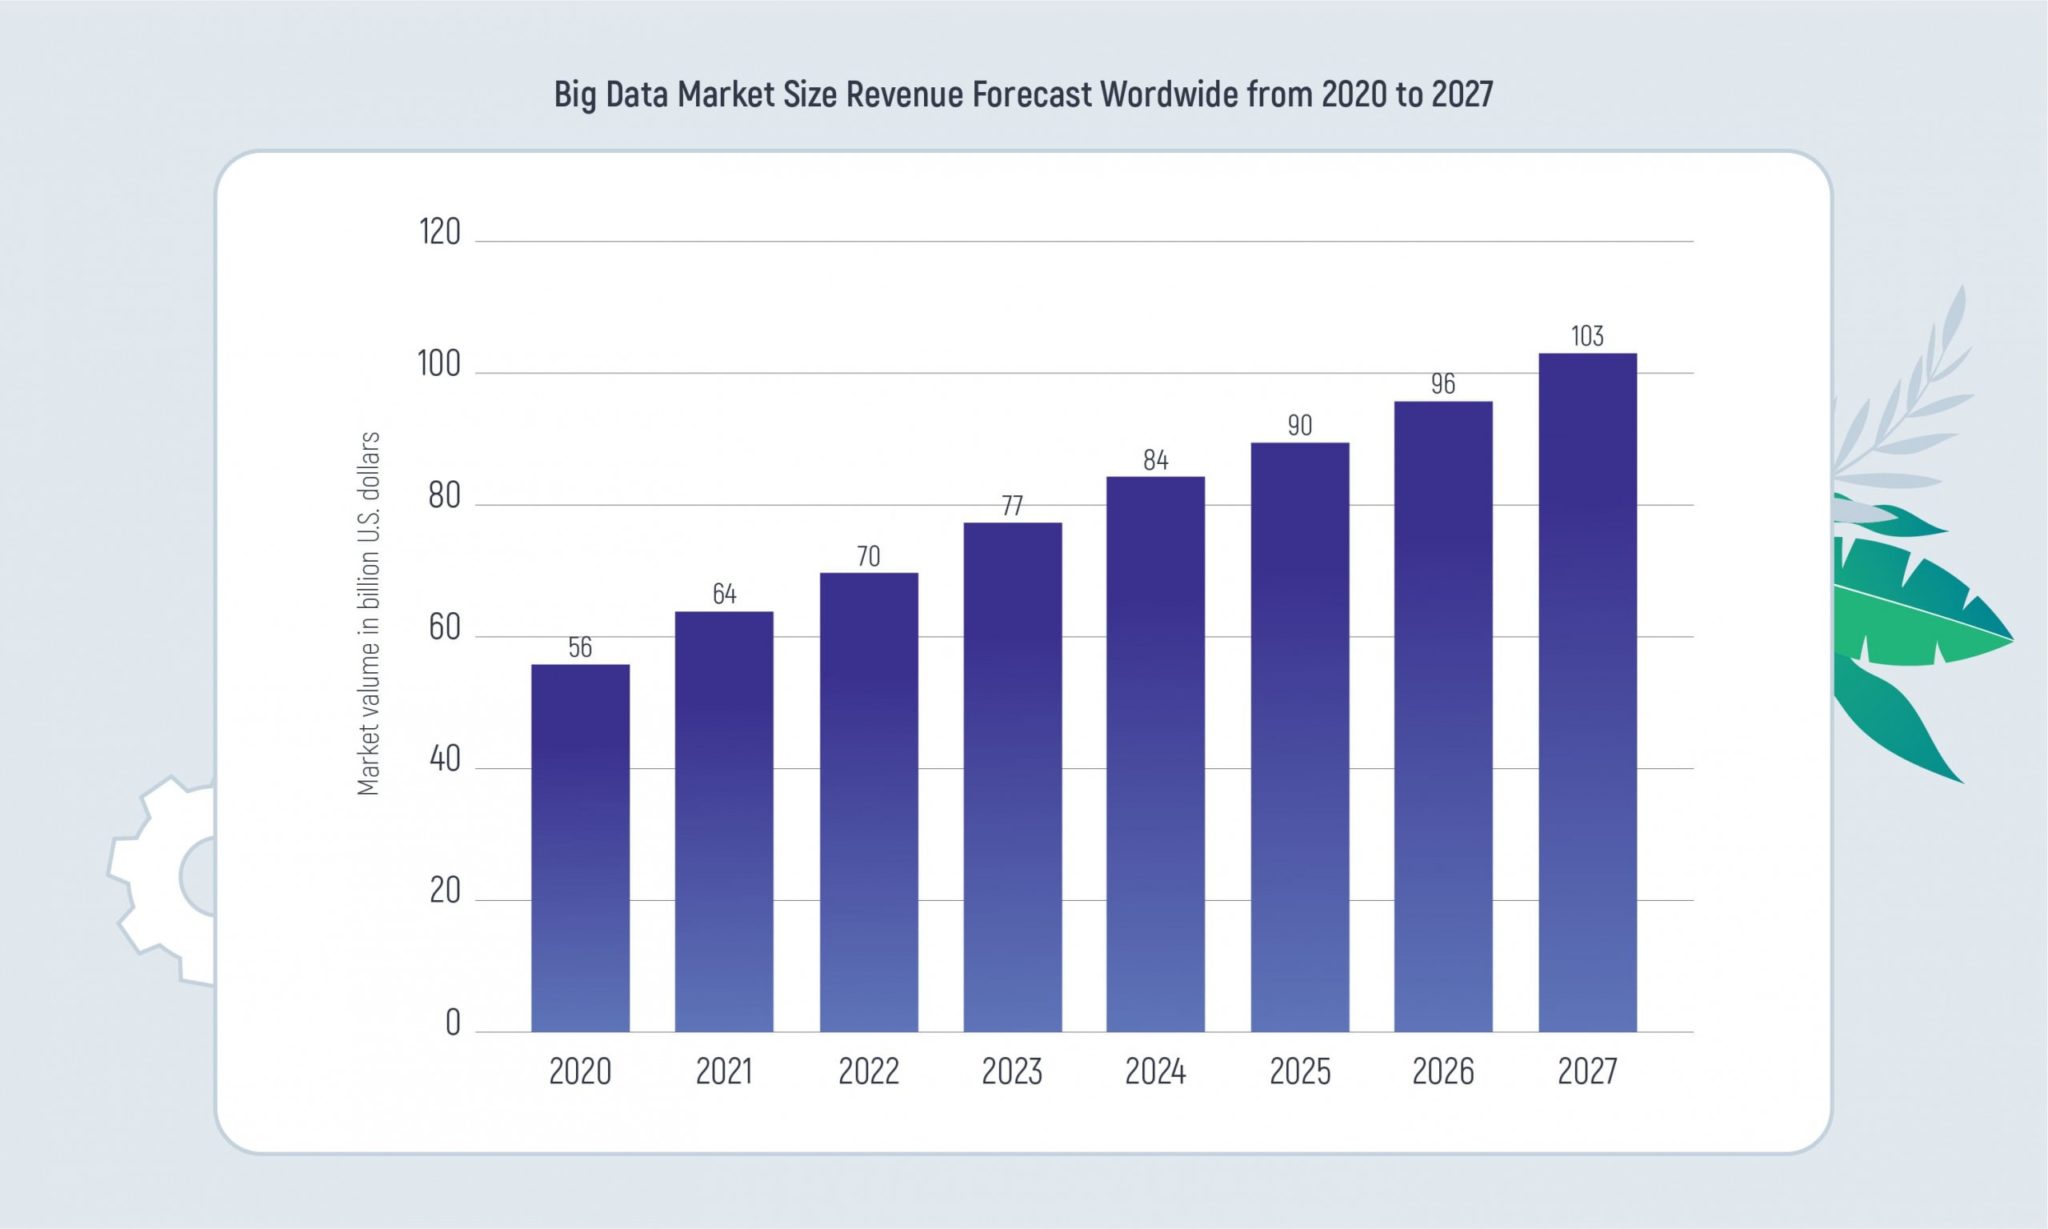 bar chart of big data market size revenue forecast worldwide from 2020 to 2027 